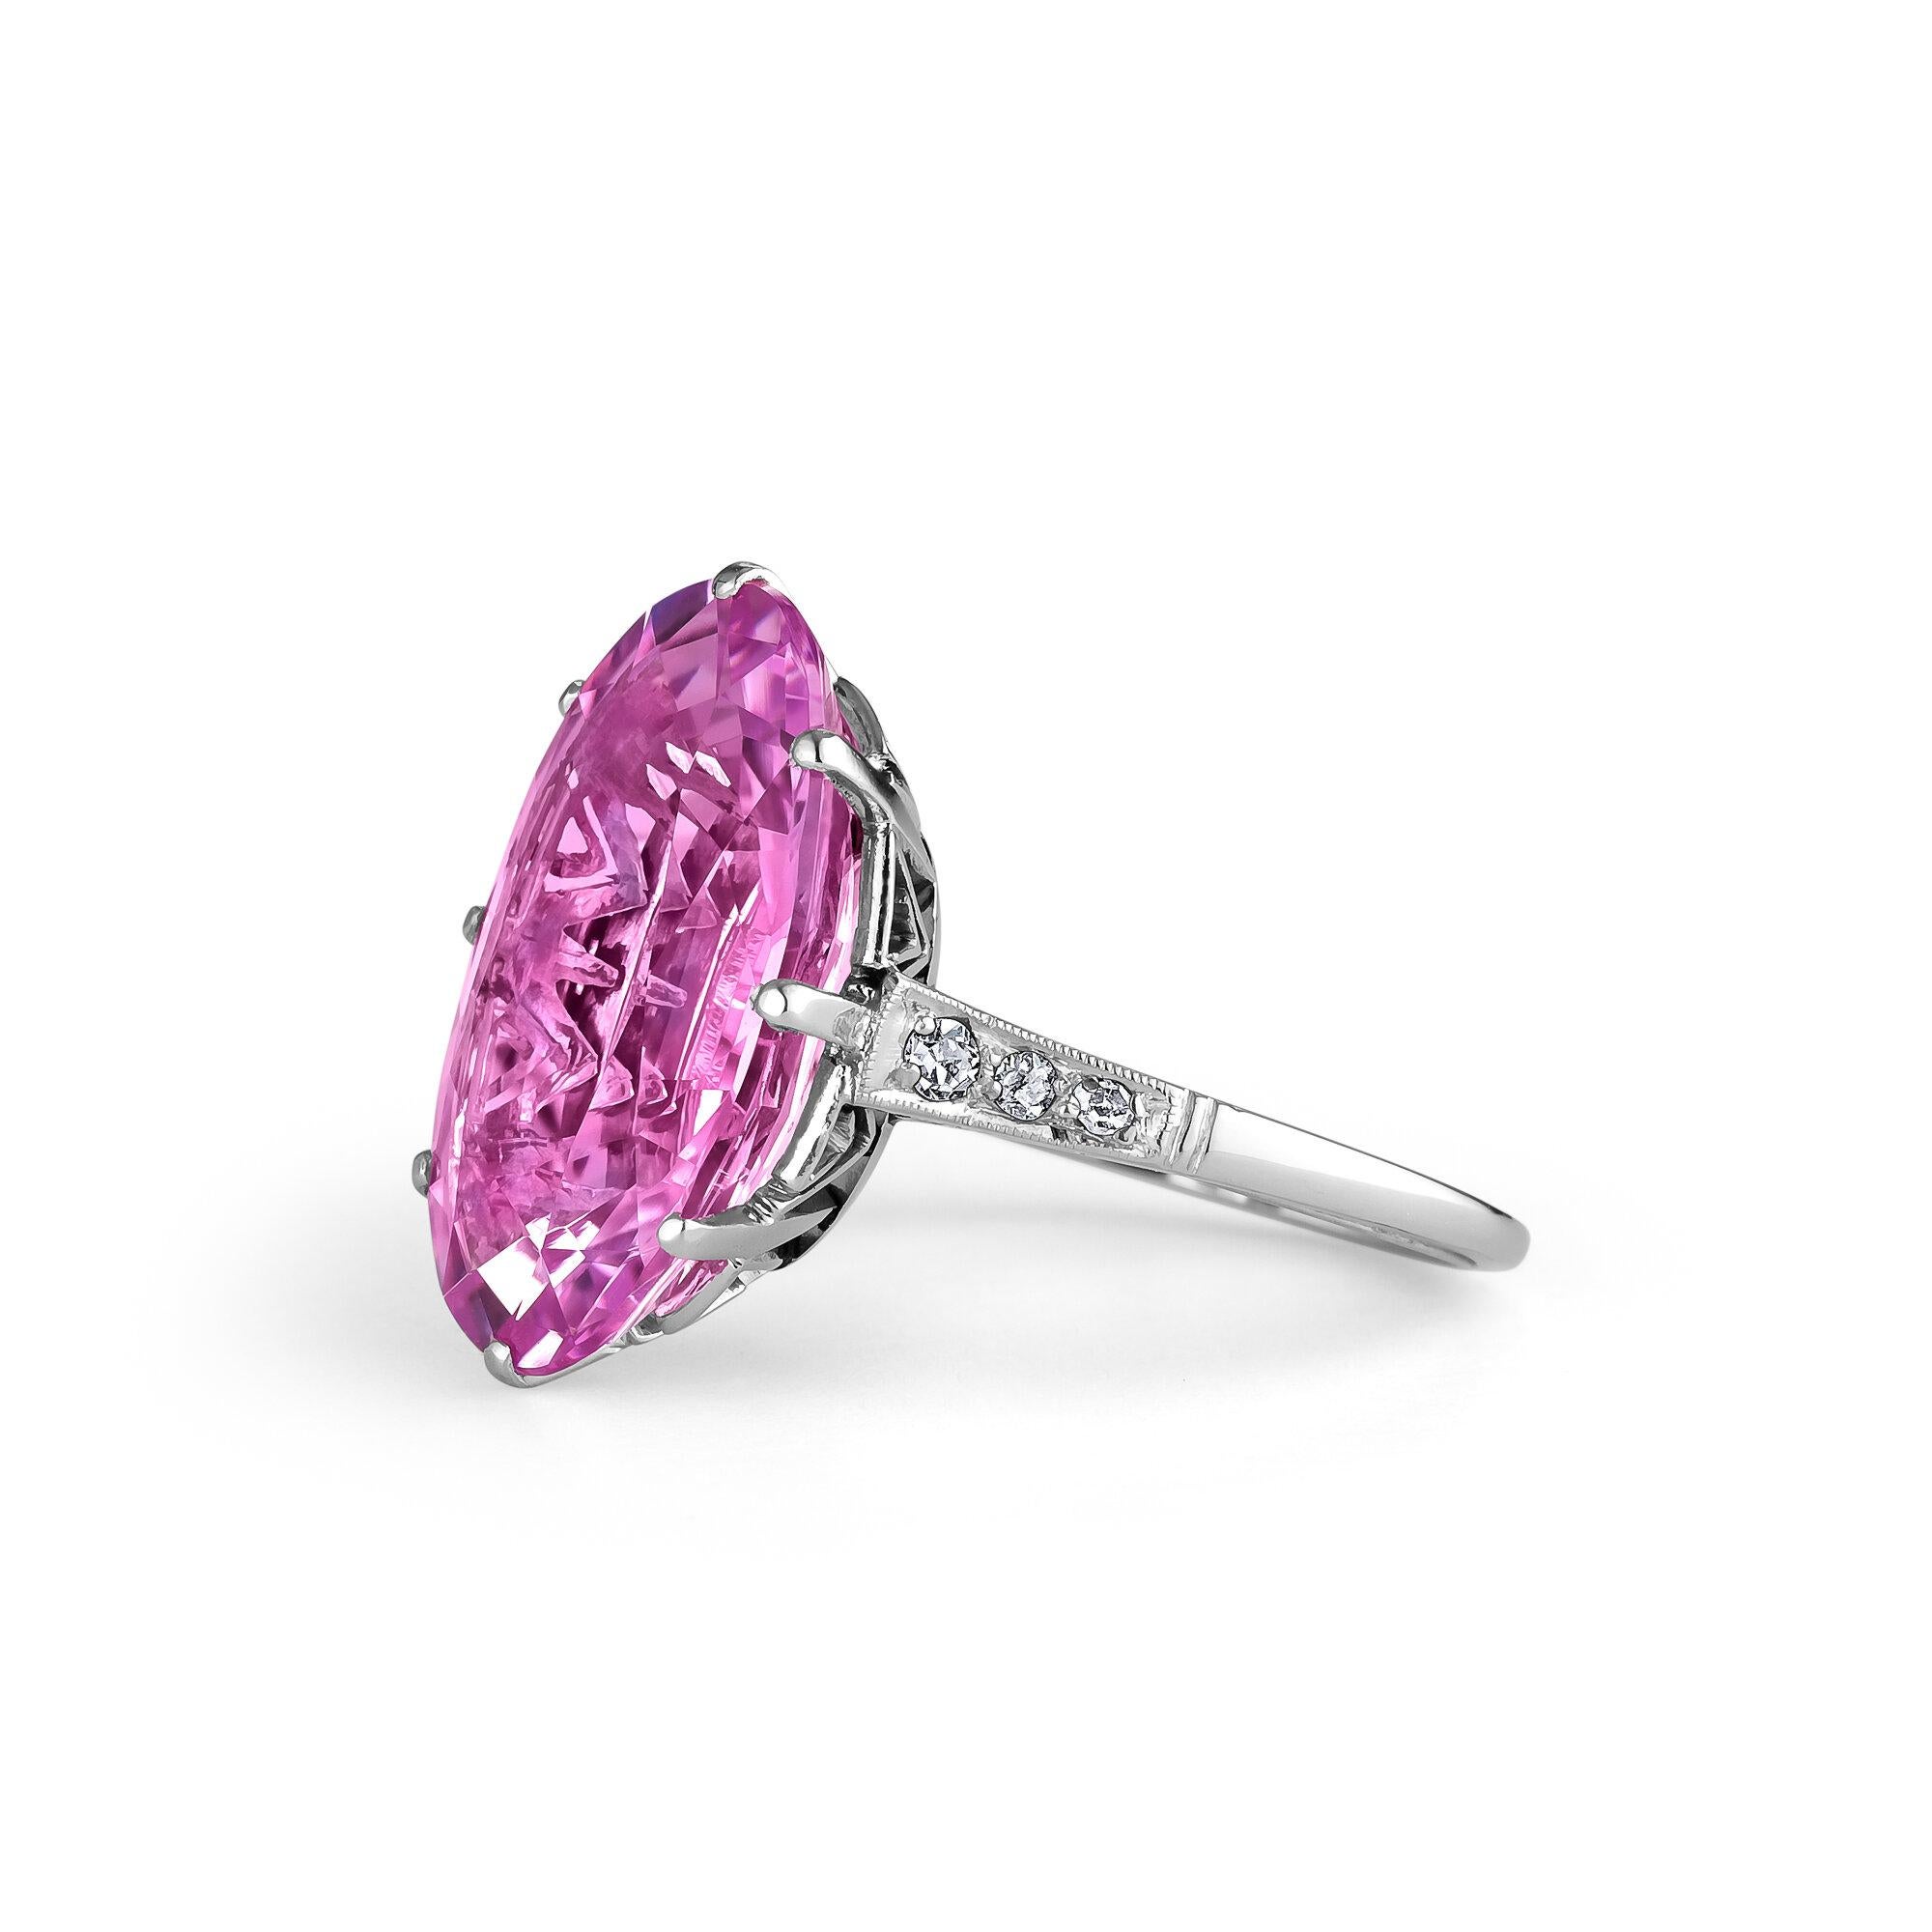 Prettier than any pink color could hope to be, this glimmering 12.51 carat oval cushion cut pink topaz gemstone flashes with lilac accents making it deliciously alive.  Mounted in an intricately designed vintage style diamond platinum setting, this